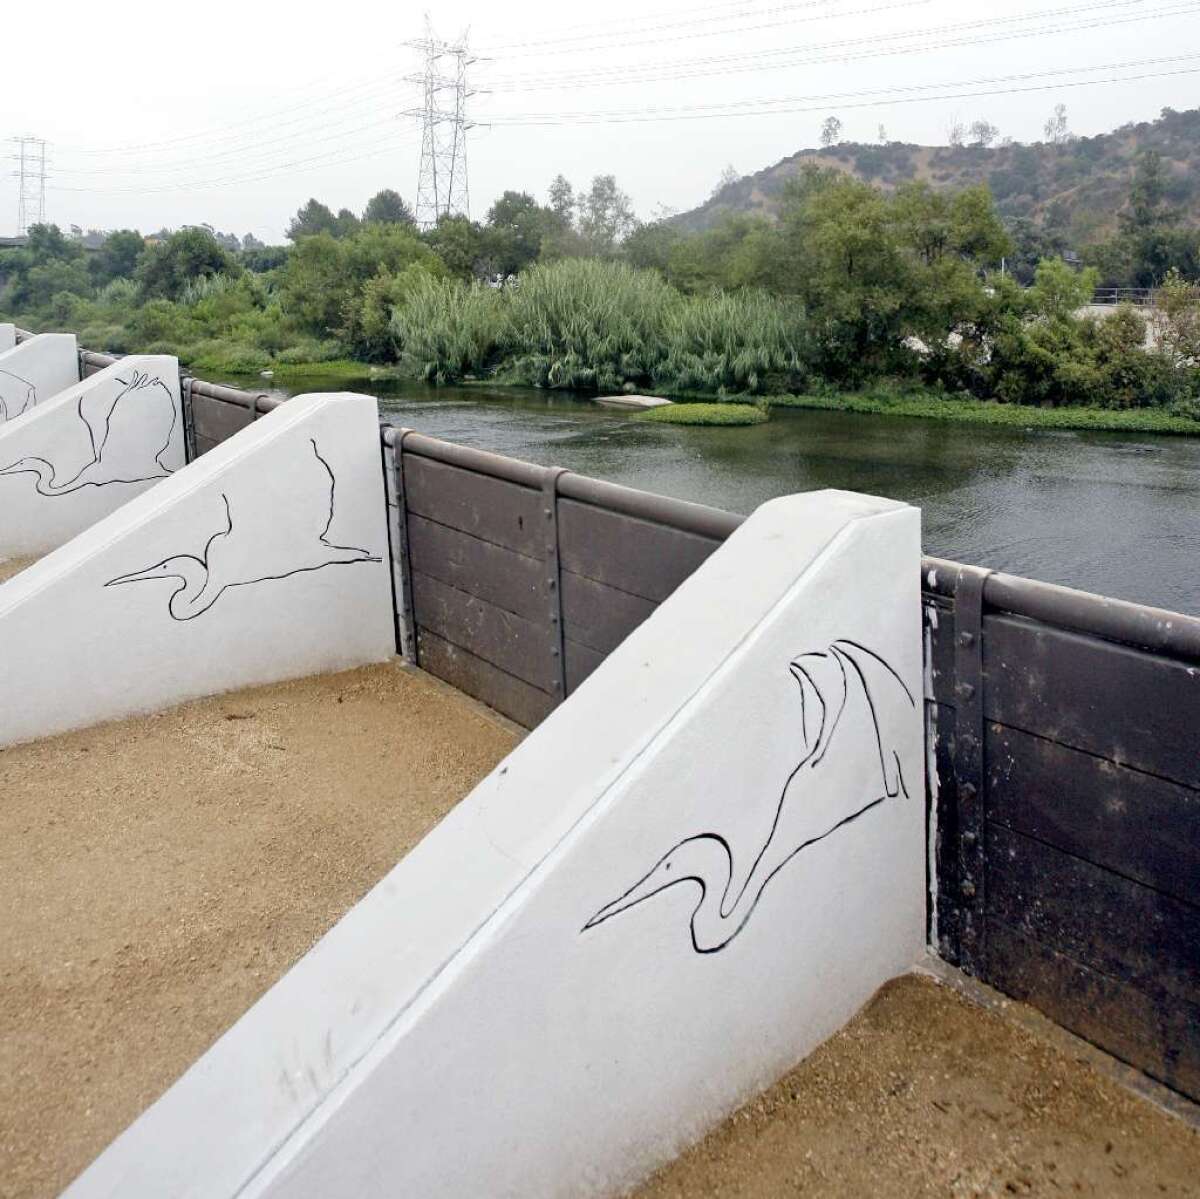 The L.A. River as seen from the Glendale Narrows Riverwalk.